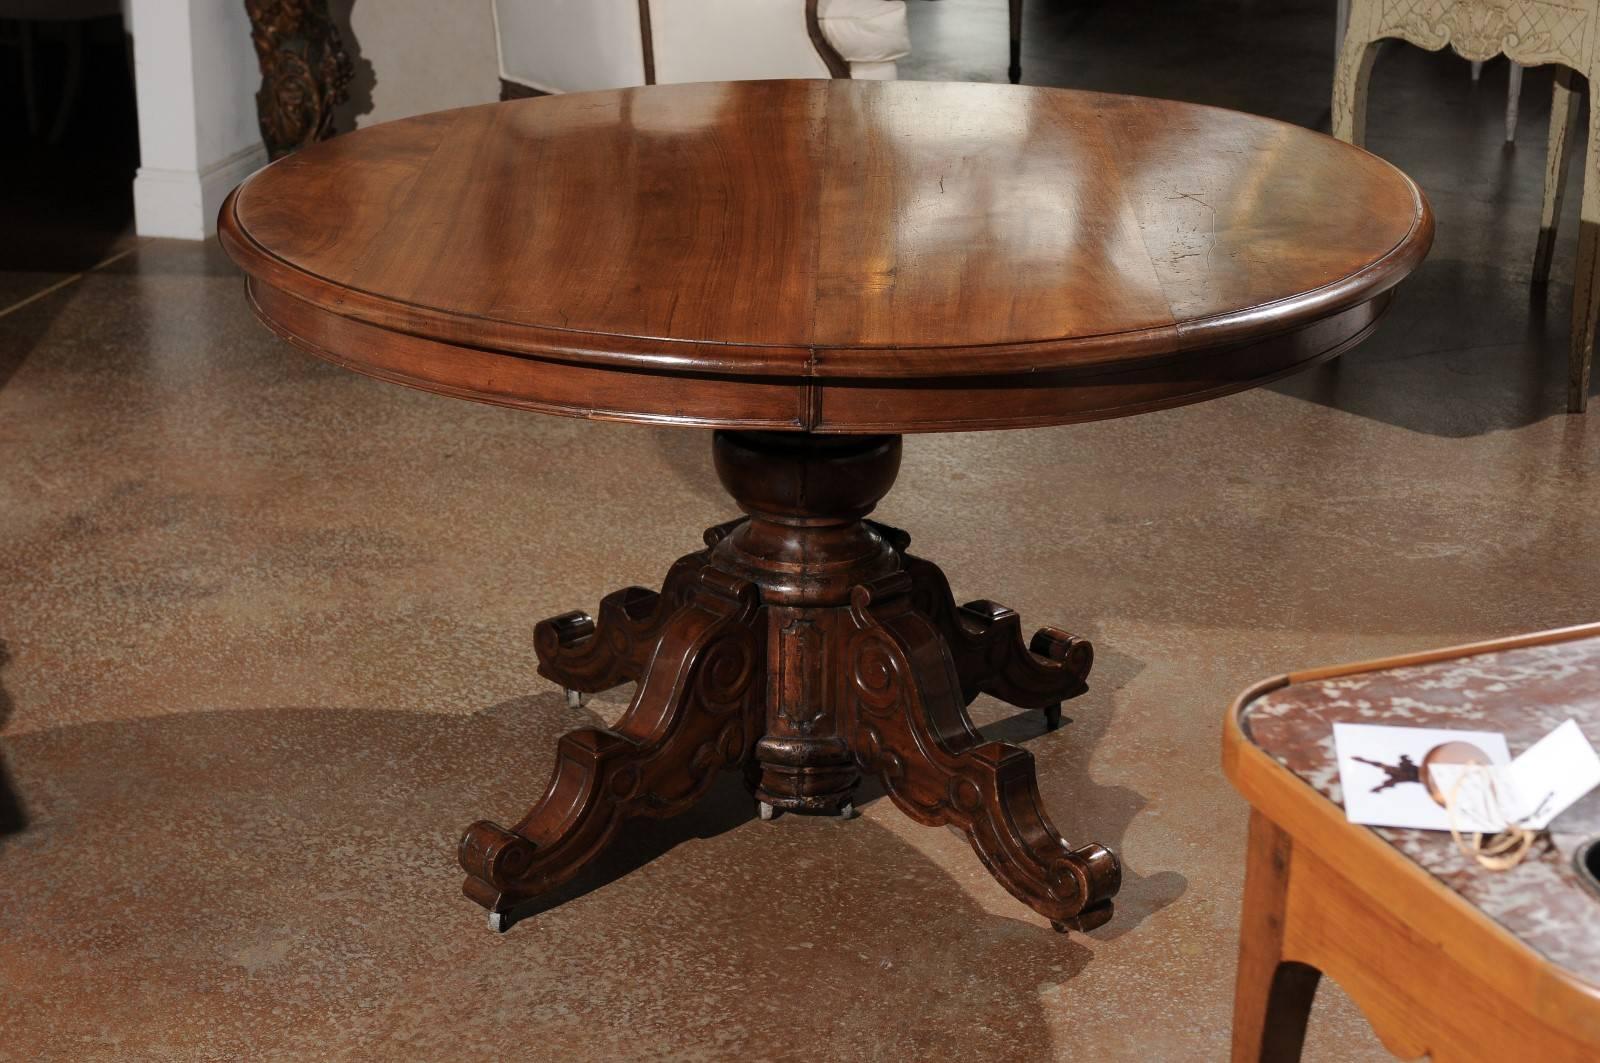 Wood French Napoléon III Walnut Pedestal Table with Carved Feet from the 1850s